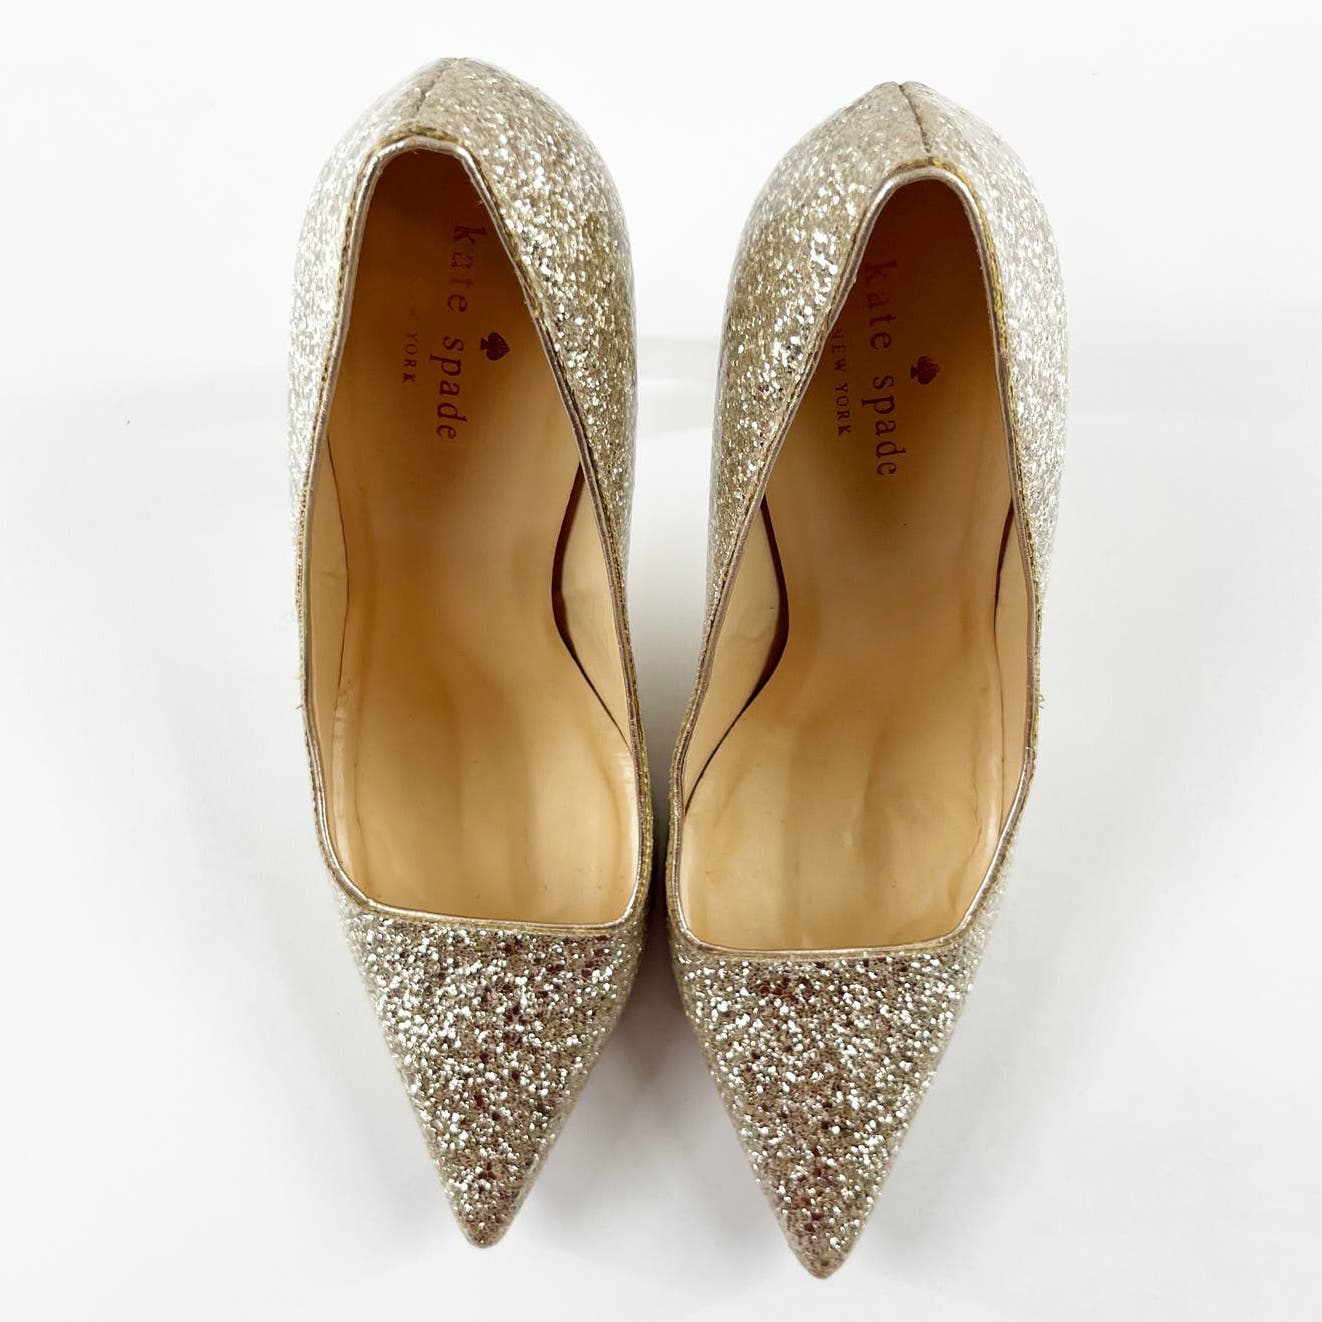 Kate Spade Licorice Too Sequin Glitter Pointy Toe Pumps Heels Gold 8